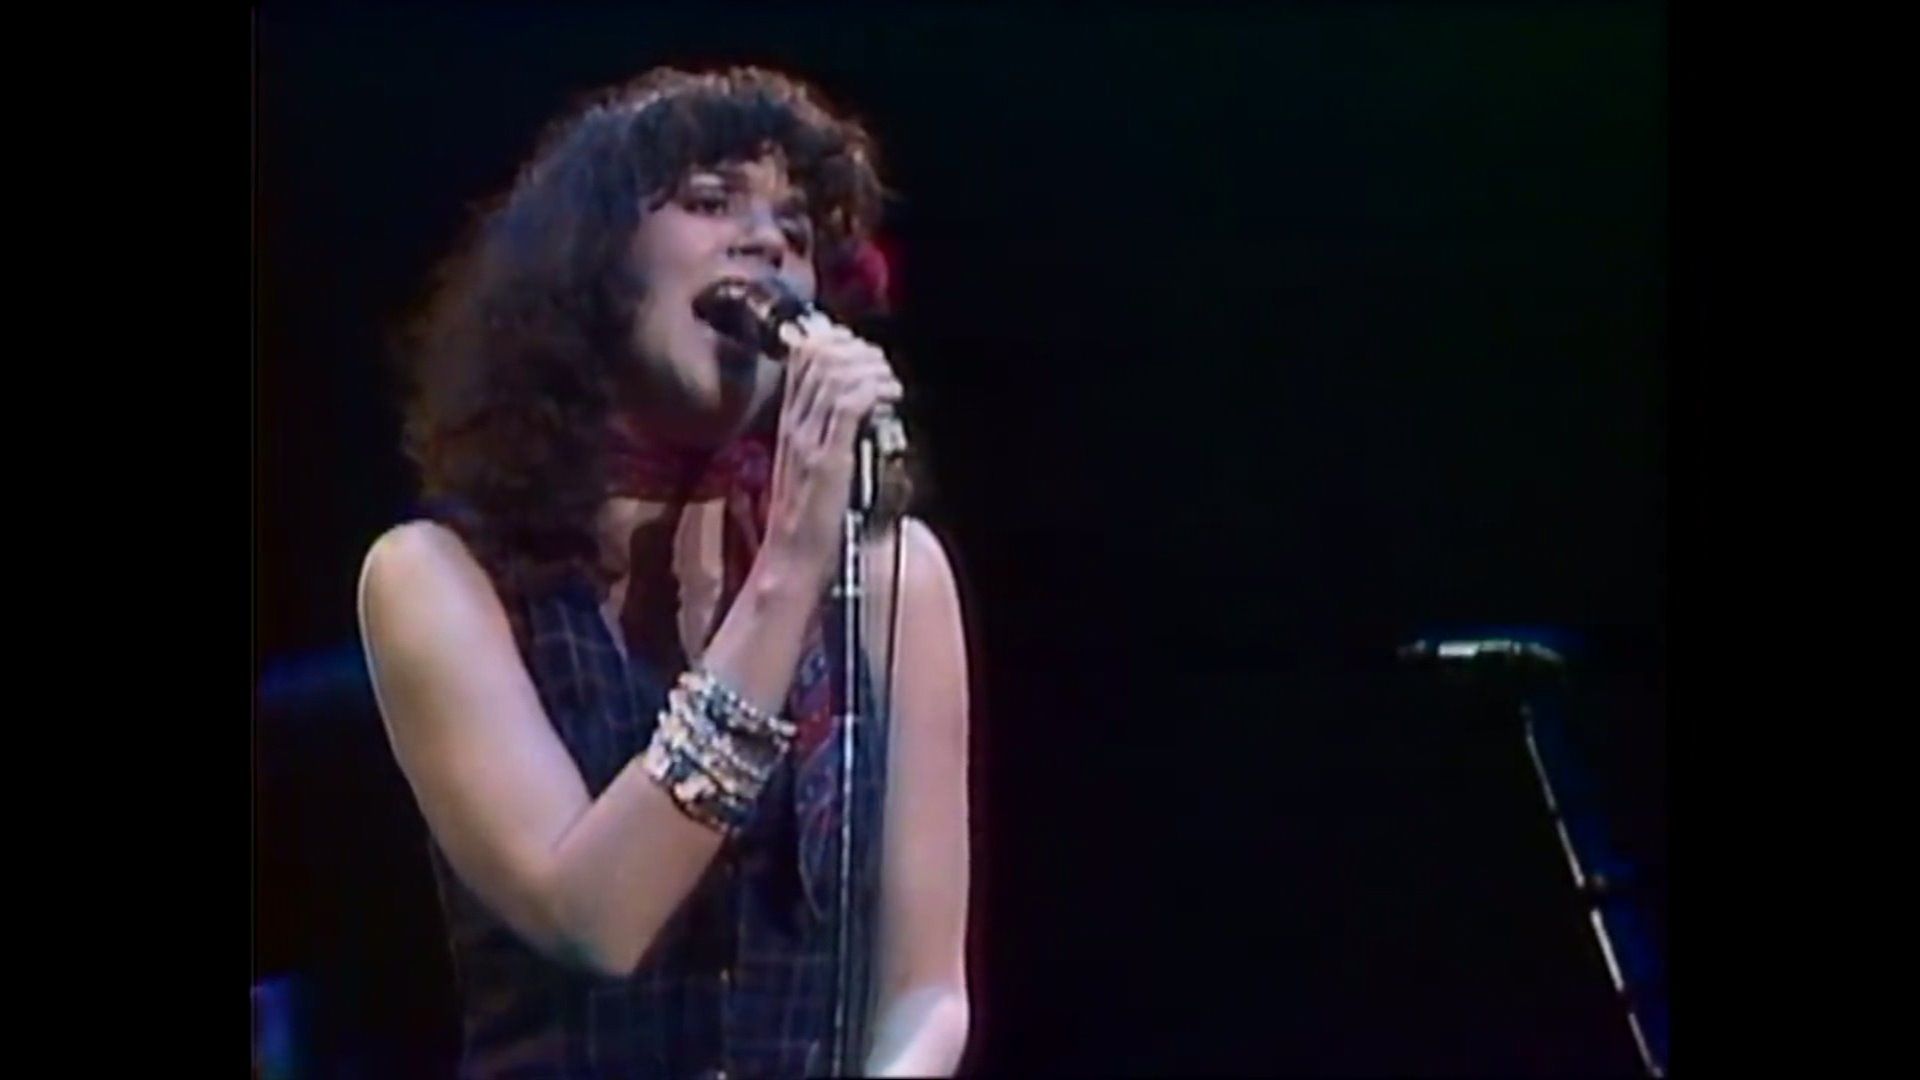 Linda Ronstadt Documentary shares great insight into Rock legend's historic career